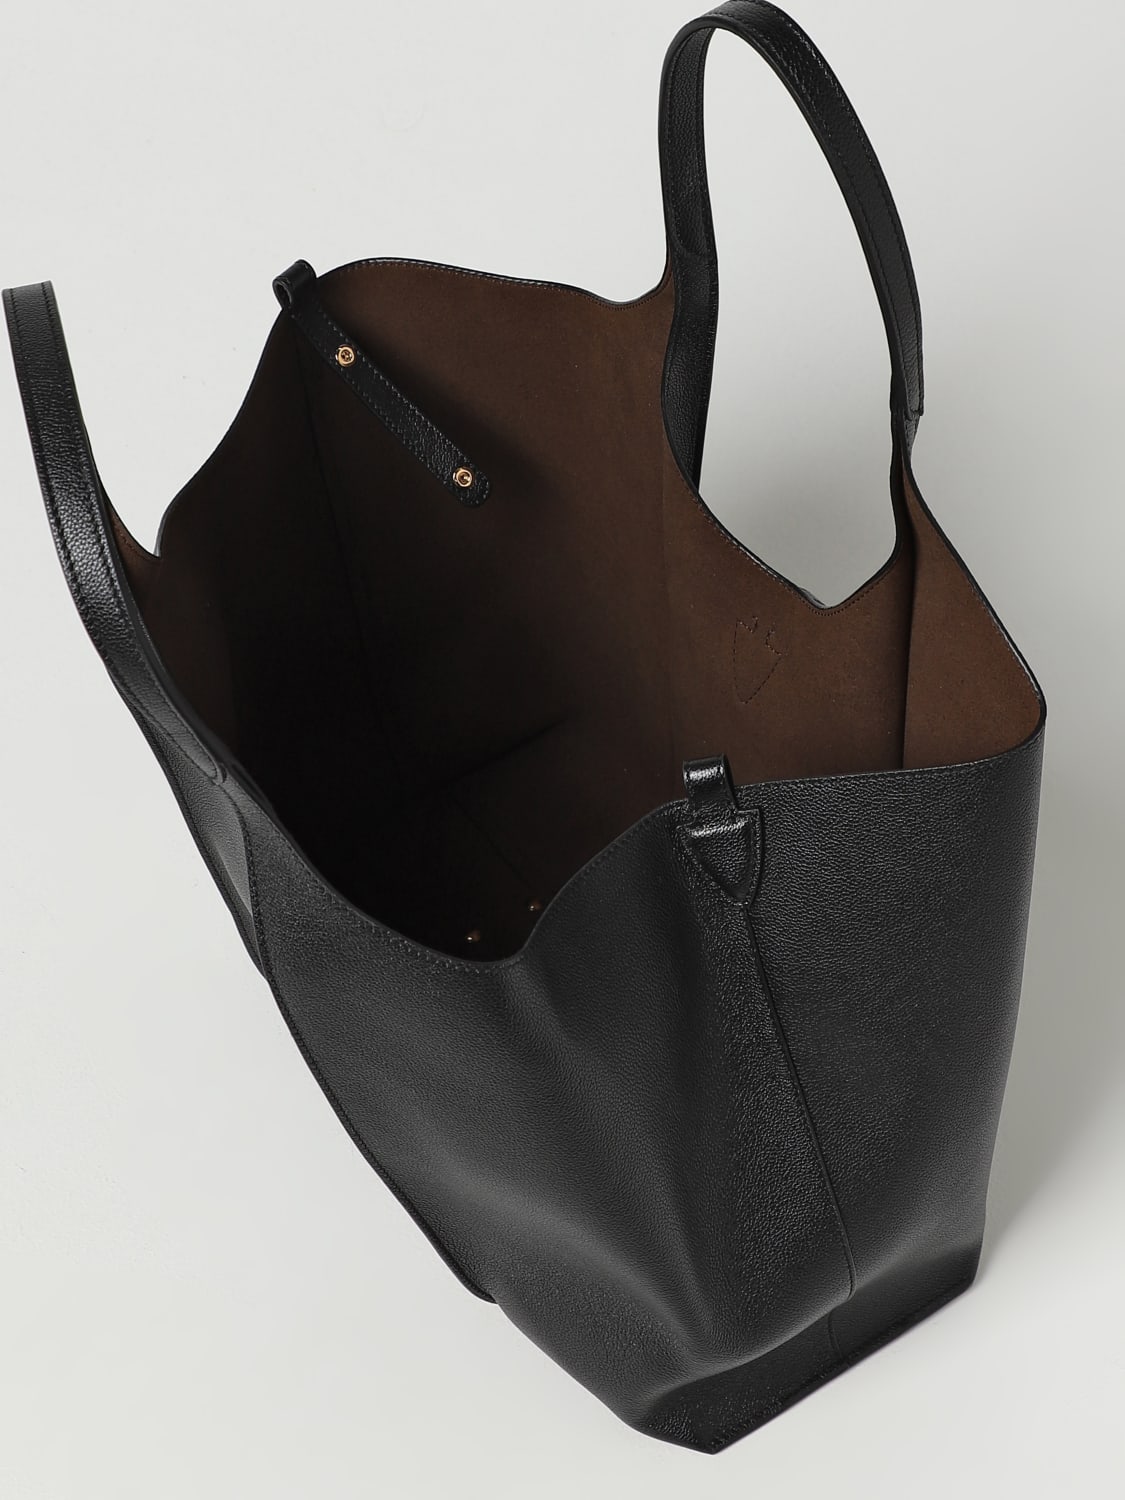 Black Tote Bags for Women